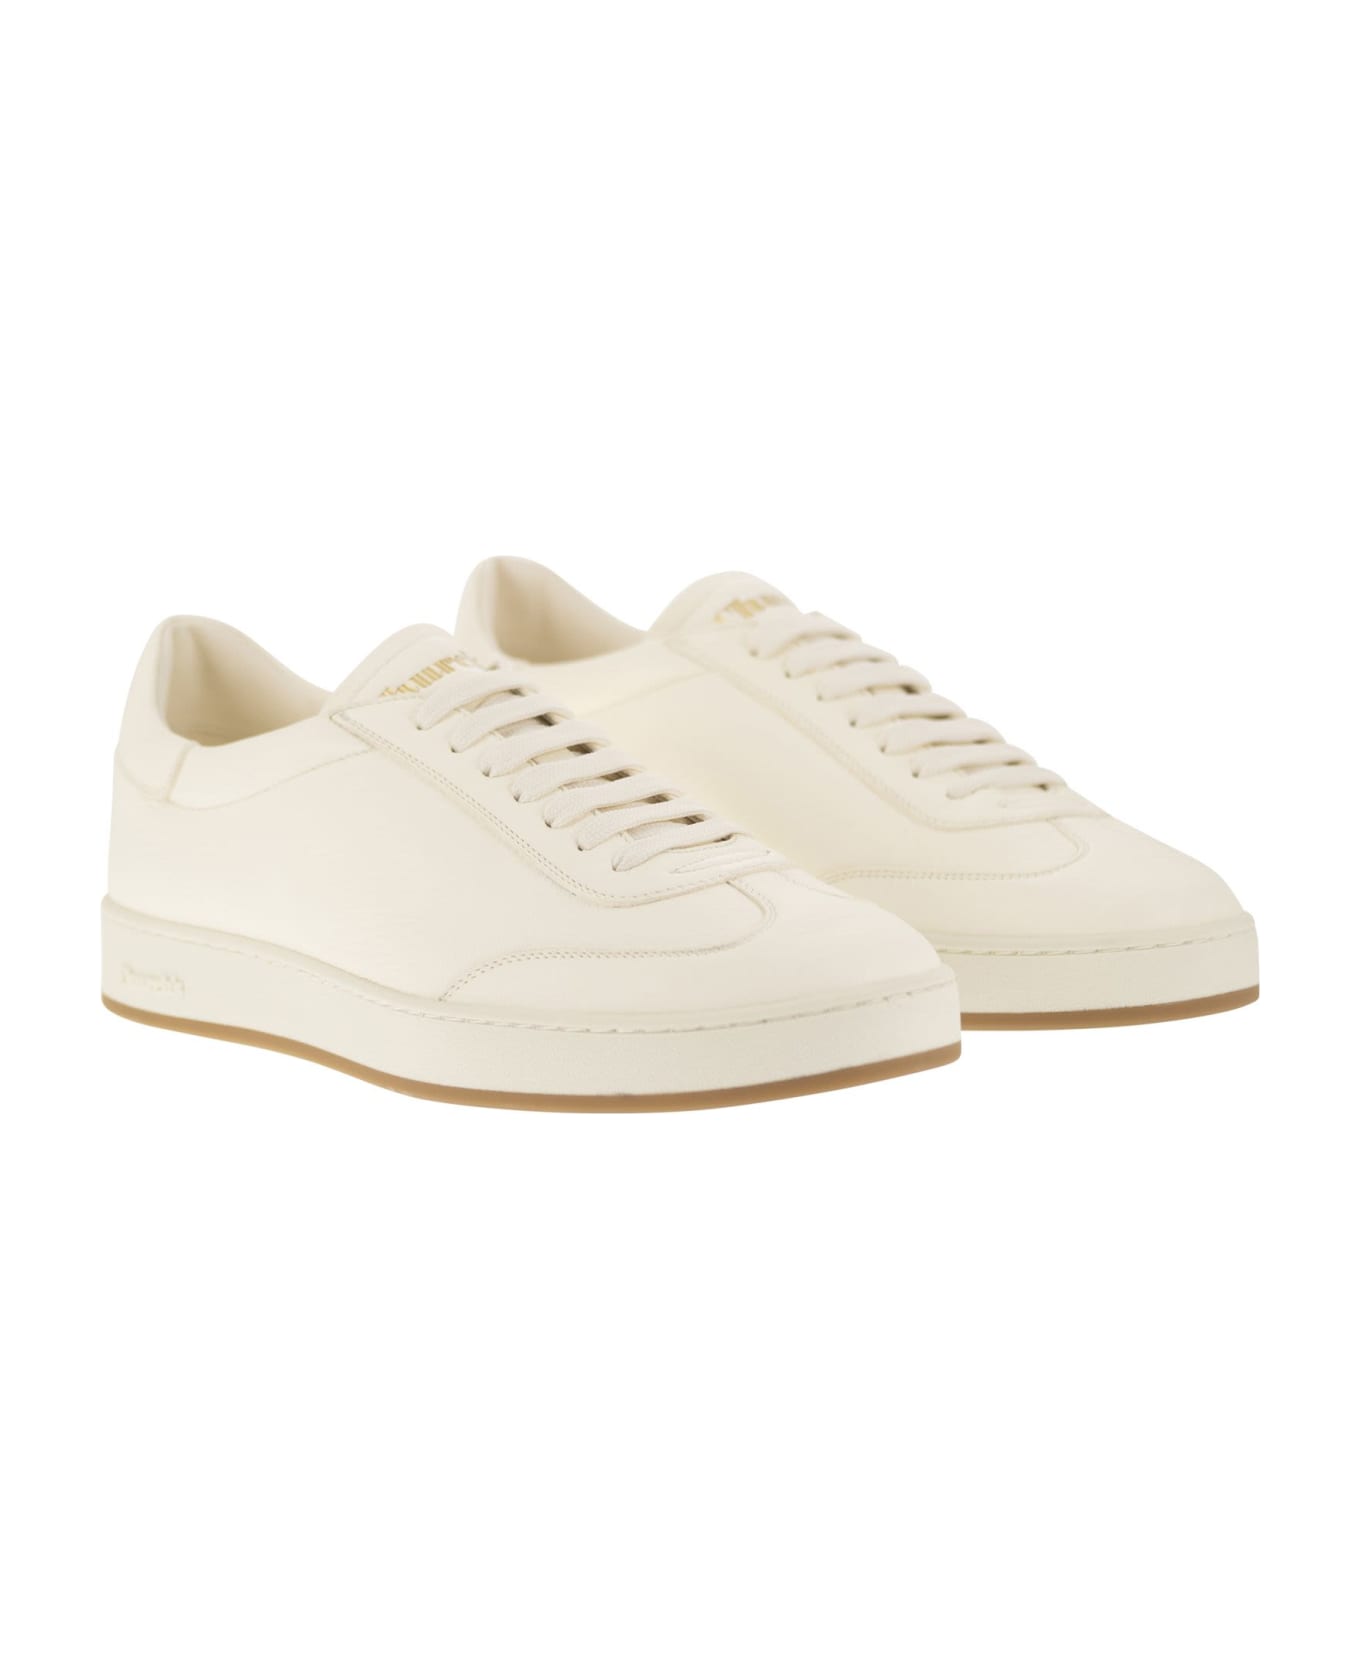 Church's Largs - Suede And Deerskin Sneaker - All Ivory